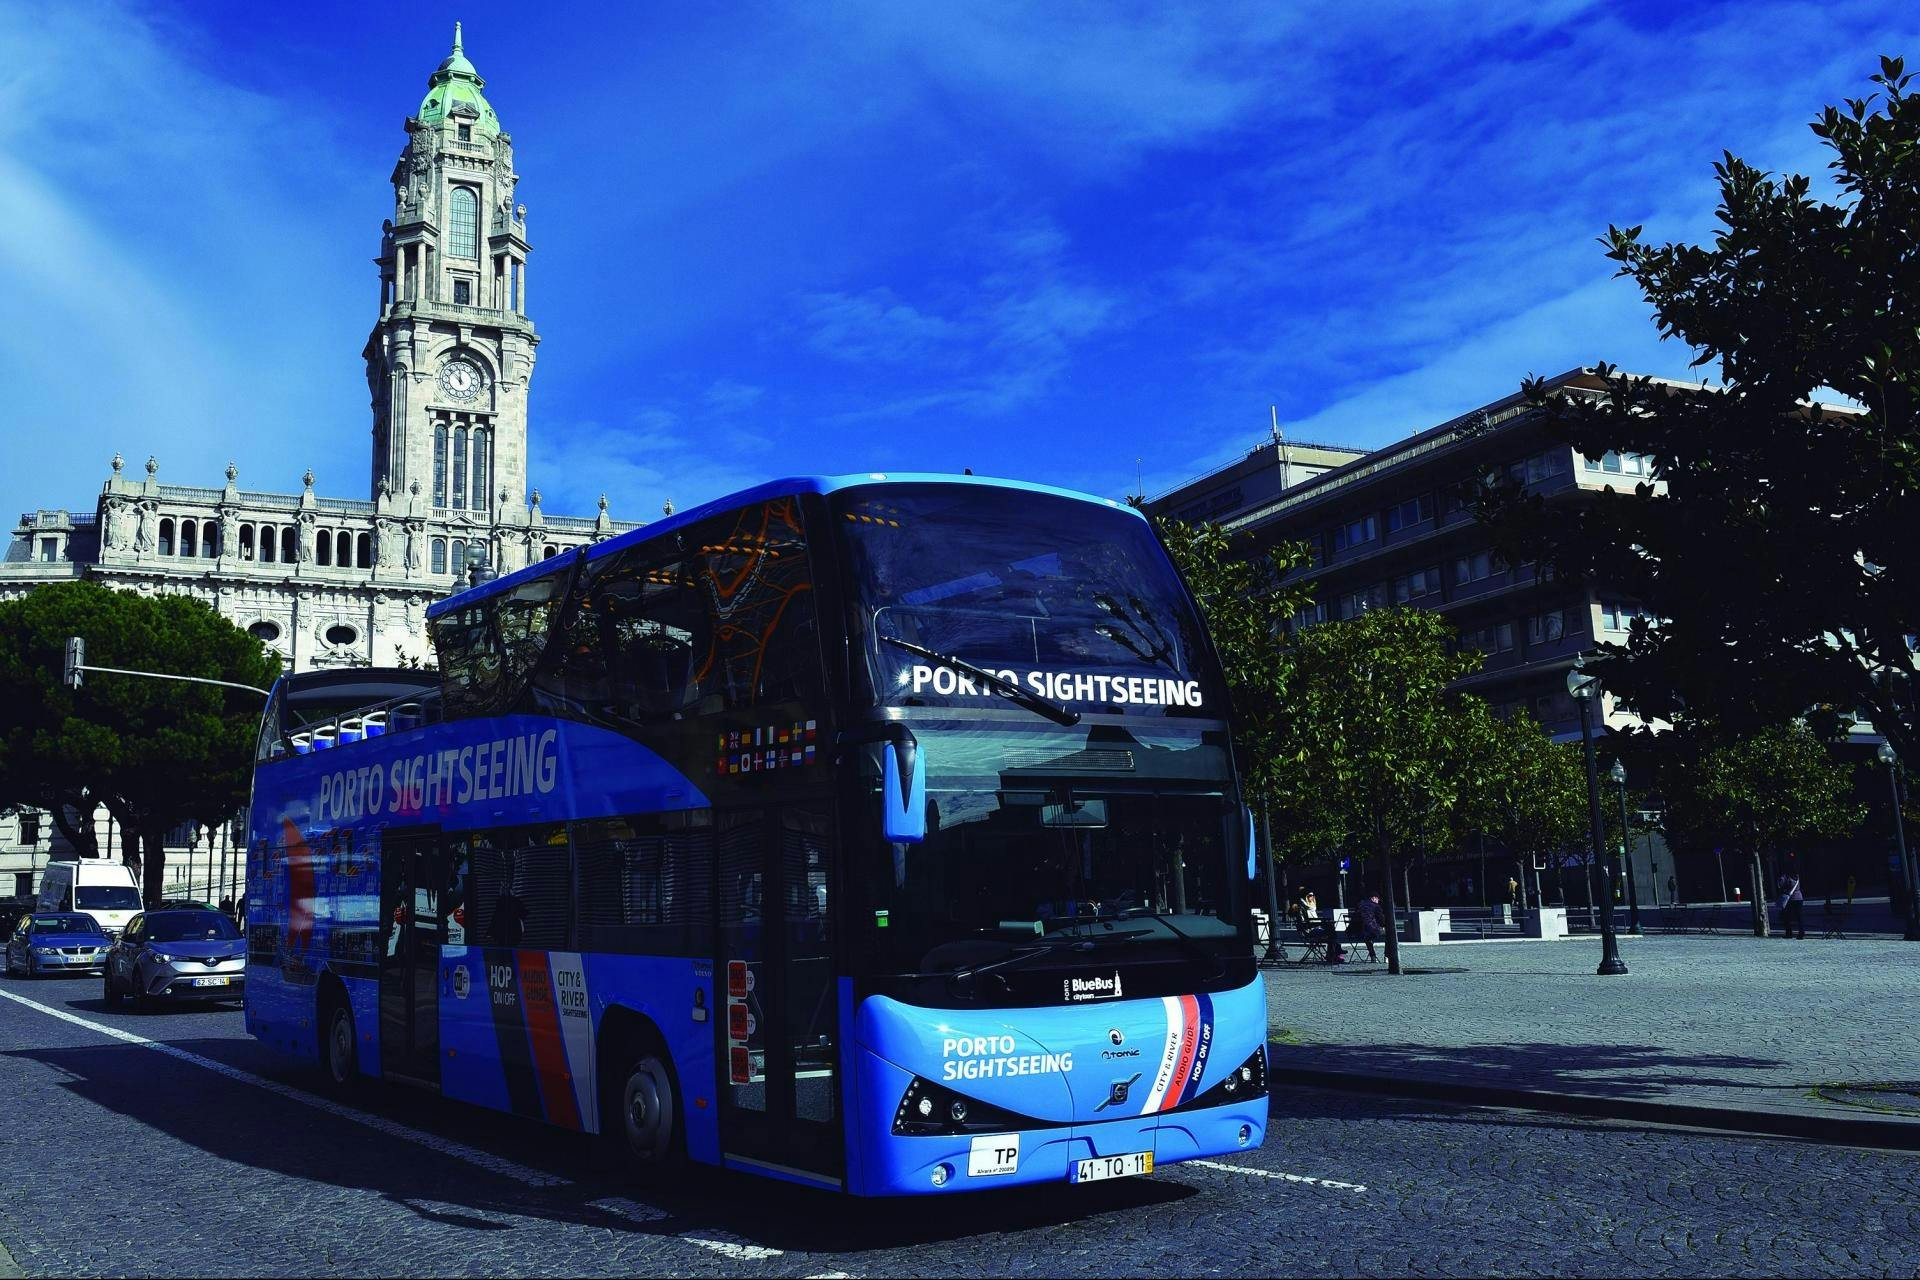 48 hours hop-on hop-off bus tour of Porto and sightseeing river cruise Musement